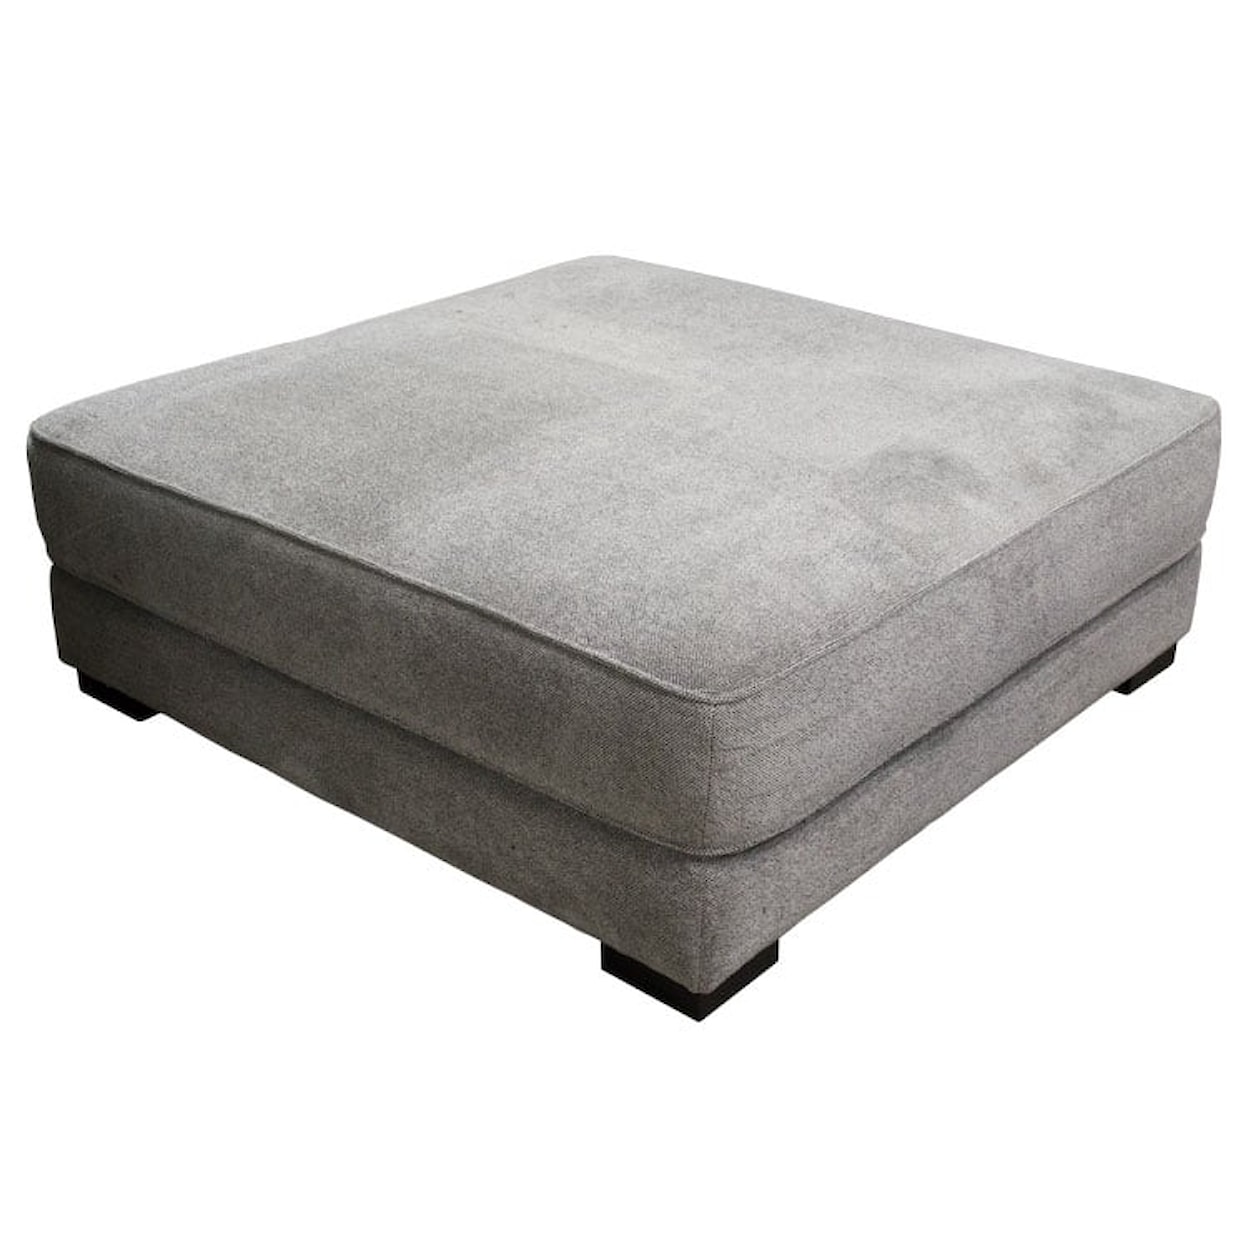 Sunset Home 52501 XL Square Cocktail Ottoman